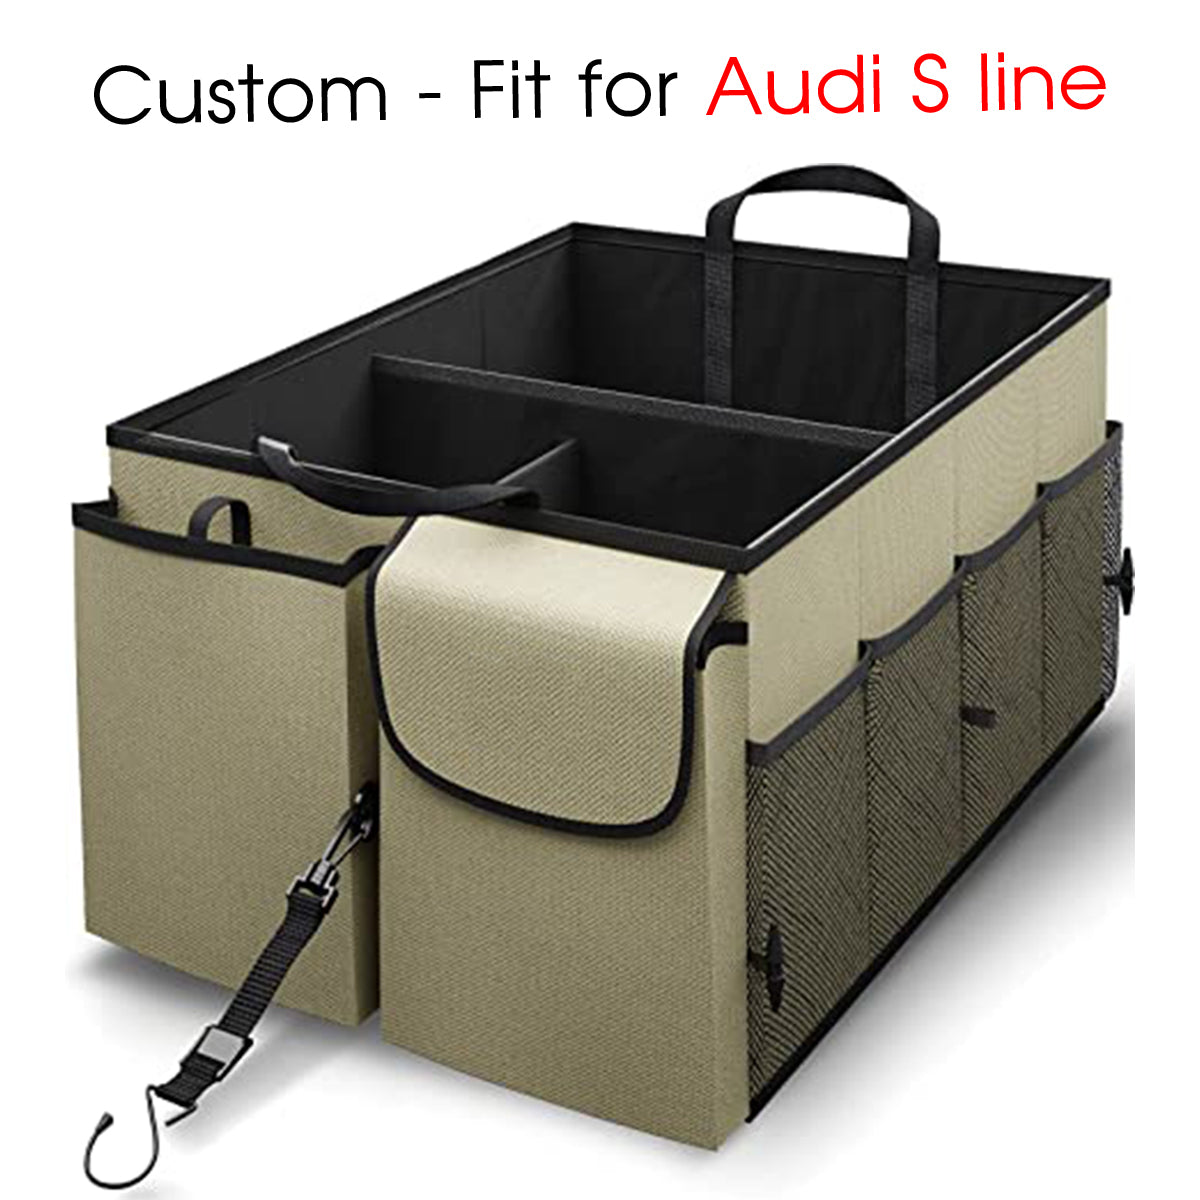 Car Trunk Organizer - Collapsible, Custom fit for All Cars, Multi-Compartment Automotive SUV Car Organizer for Storage w/ Adjustable Straps - Car Accessories for Women and Men LM12993